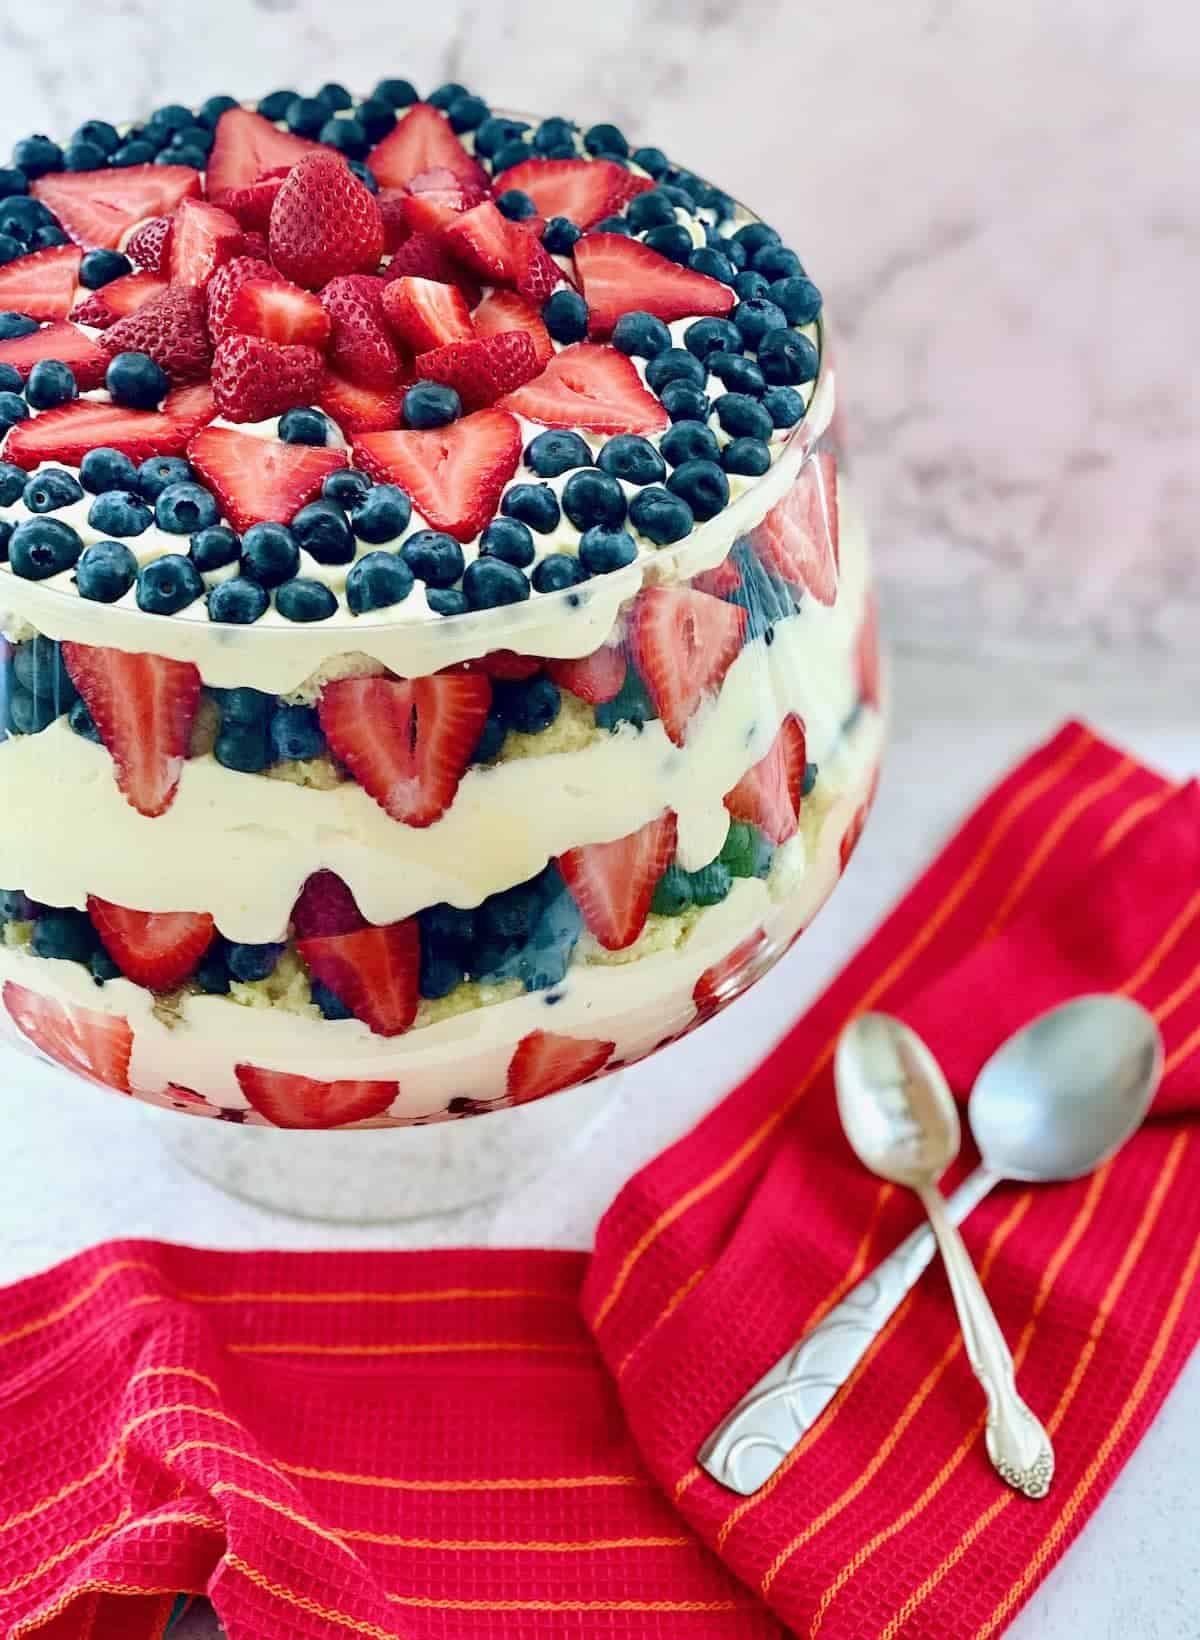 trifle dish filled with pudding and berries.